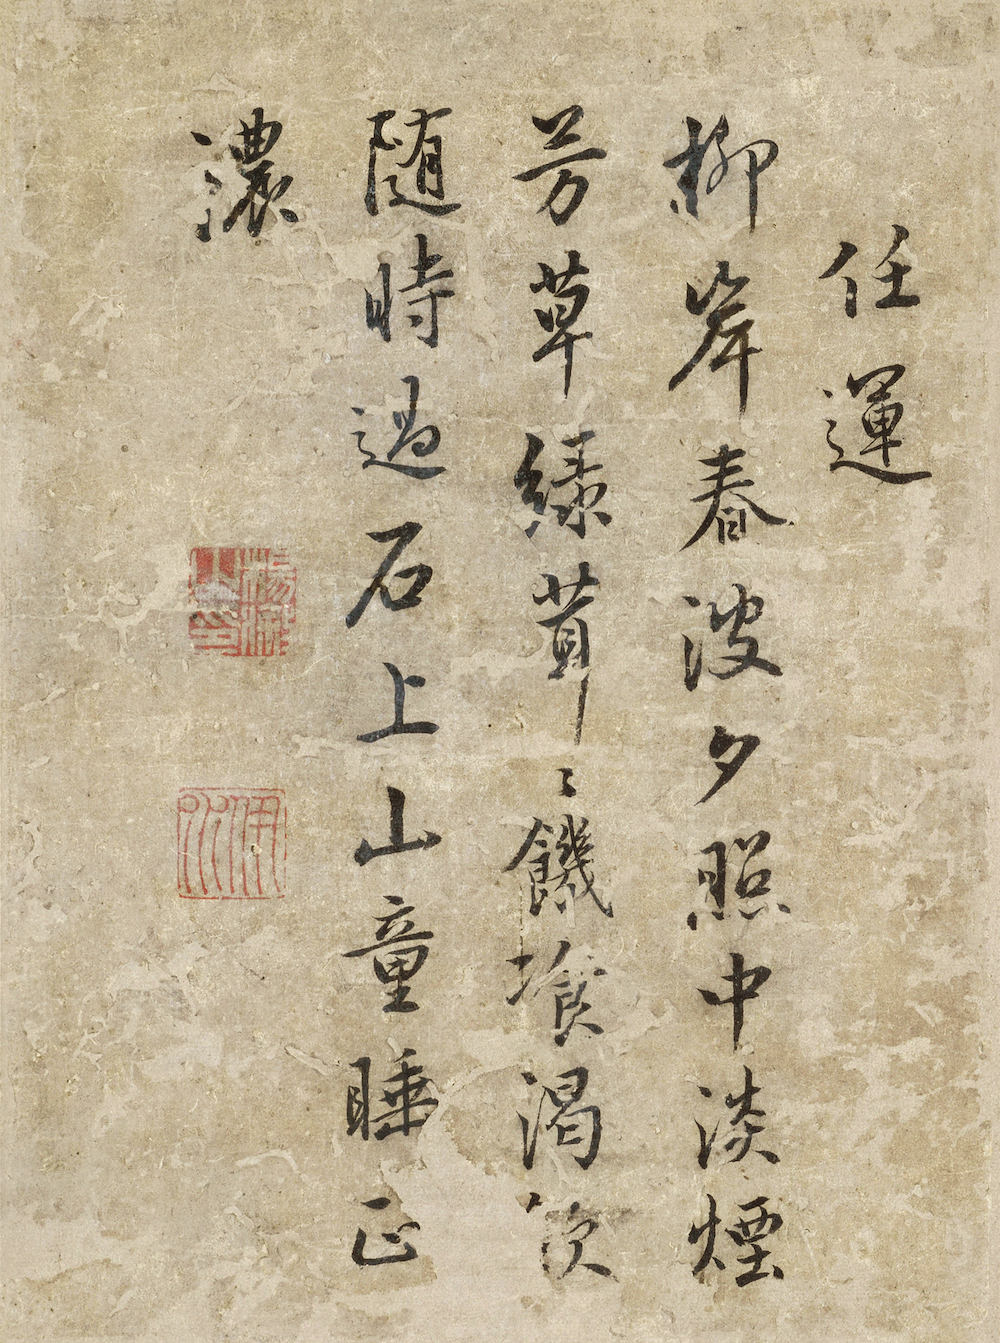 (Ming) Zhang Mu's Cattle Atlas·Ren Yun, ink and color on paper, vertical 23.7 cm, horizontal 17.7 cm, donated by Mr. Yang Quan, collected by Guangzhou Art Museum